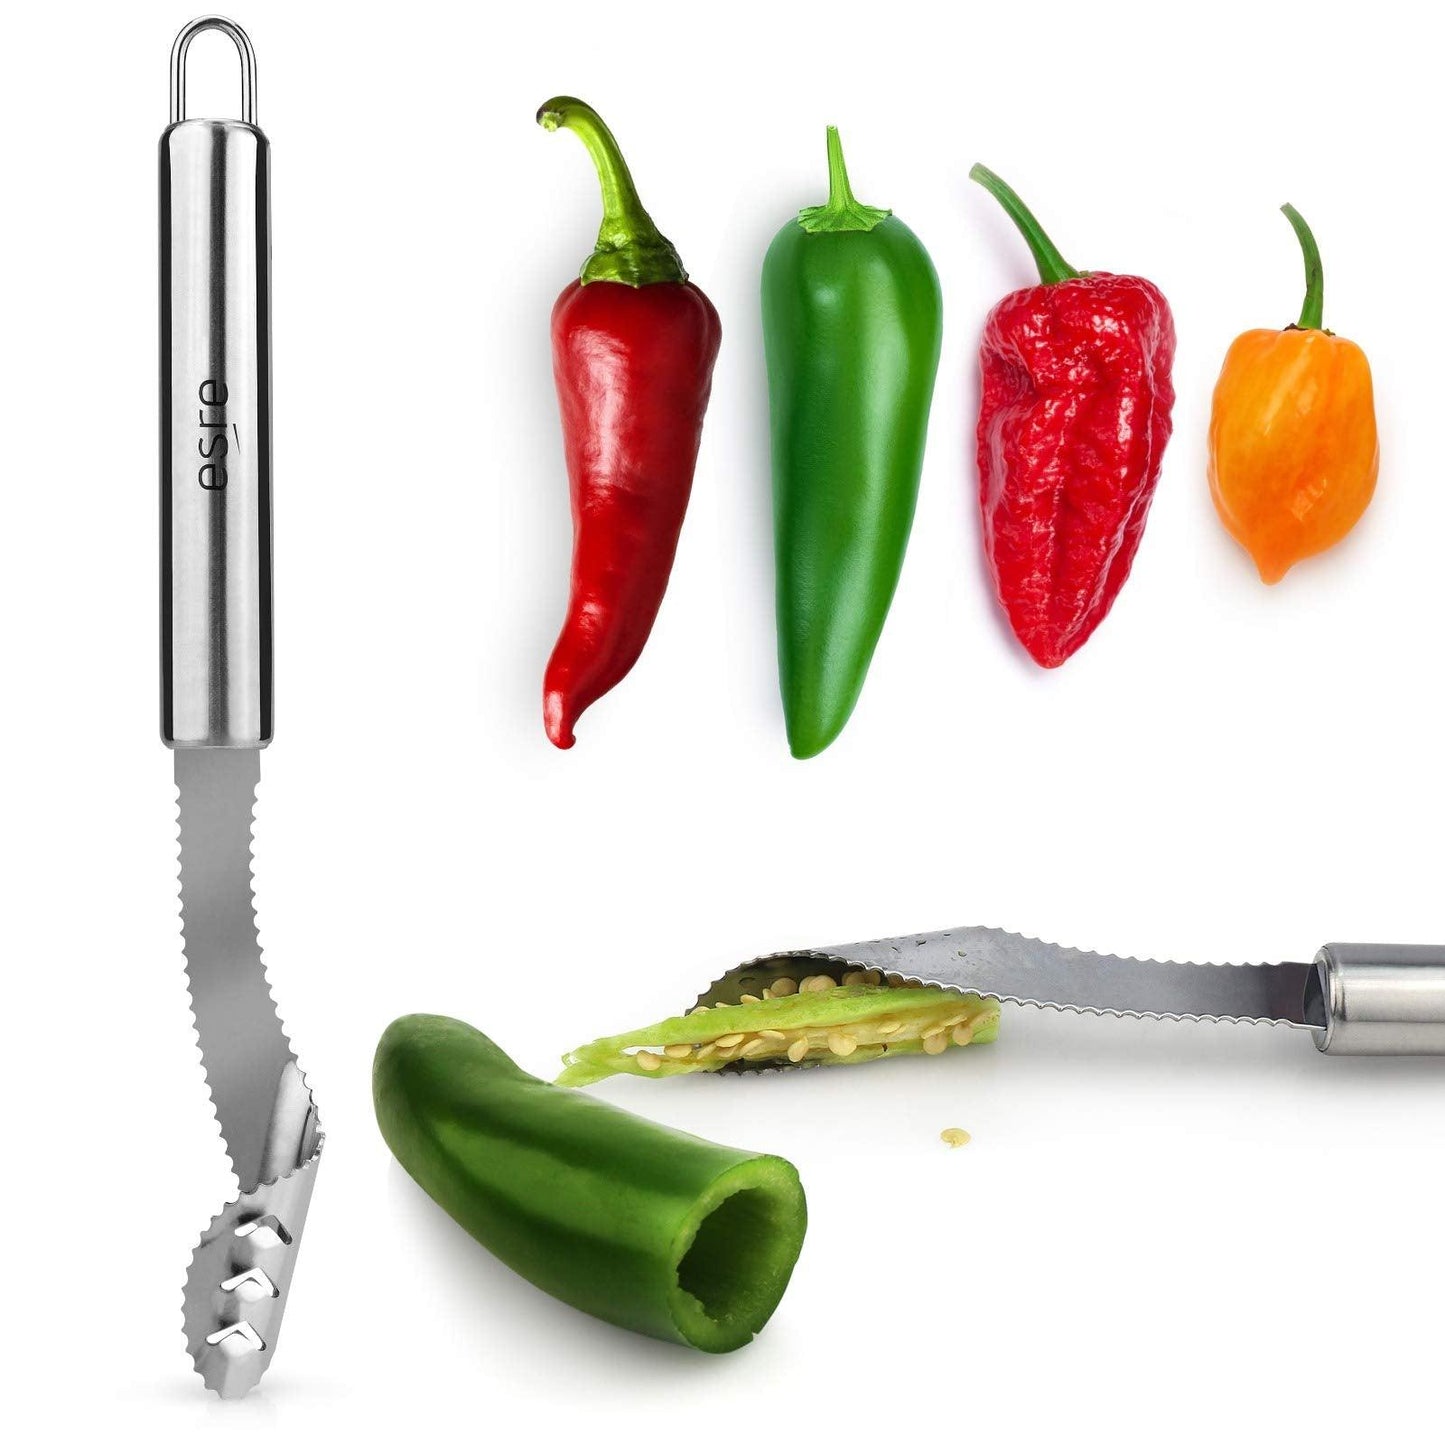 ESRE Stainless Steel Pepper Core Remover, Jalapeno Pepper Corer Tool Chili Deseeder, Sharp Edge Kitchen Gadget Seed Remover Dishwasher Safe, Slice off Vegetables tops for Barbecue - CookCave